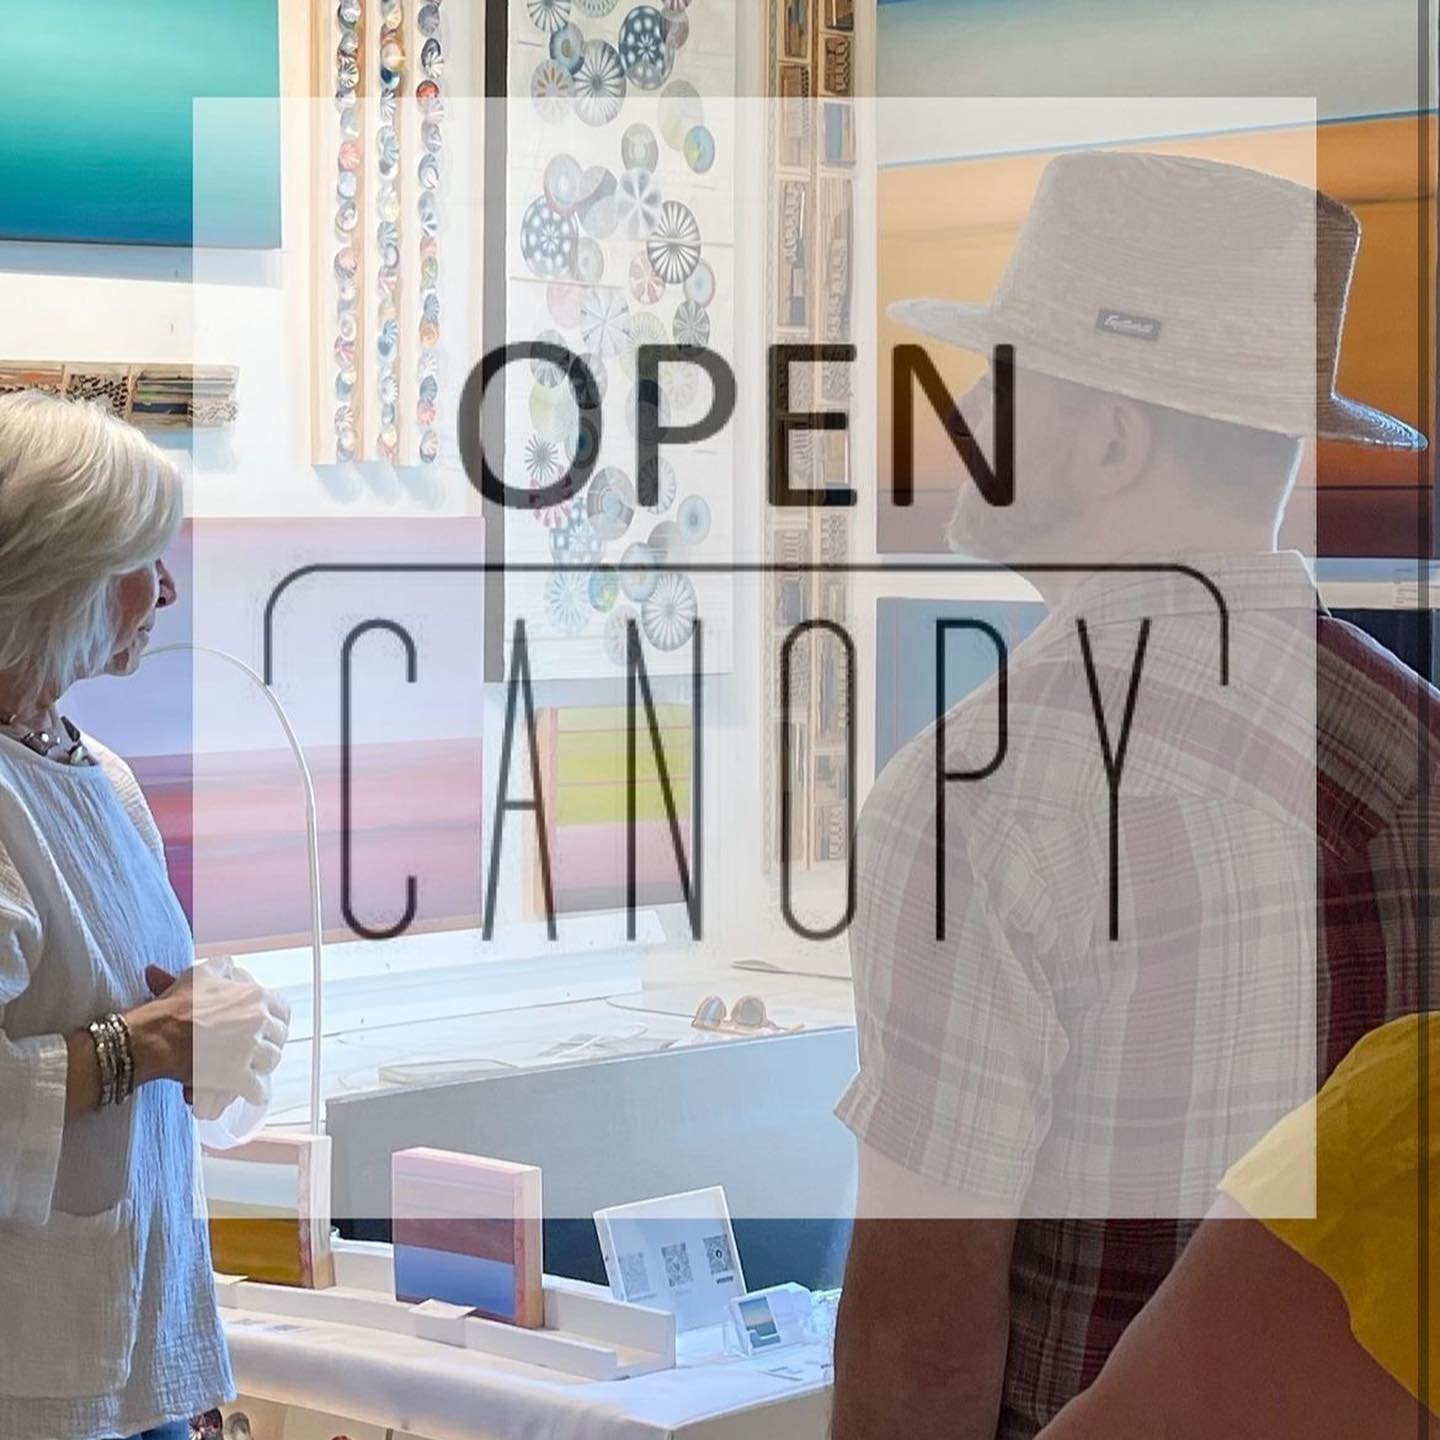 The first Saturday of every month from 1-4pm at Canopy, resident artists open their private studios to the public. Don&rsquo;t forget the art trailers and studios in the back, behind the main buildings - LOTS of great art and community to explore 👀 